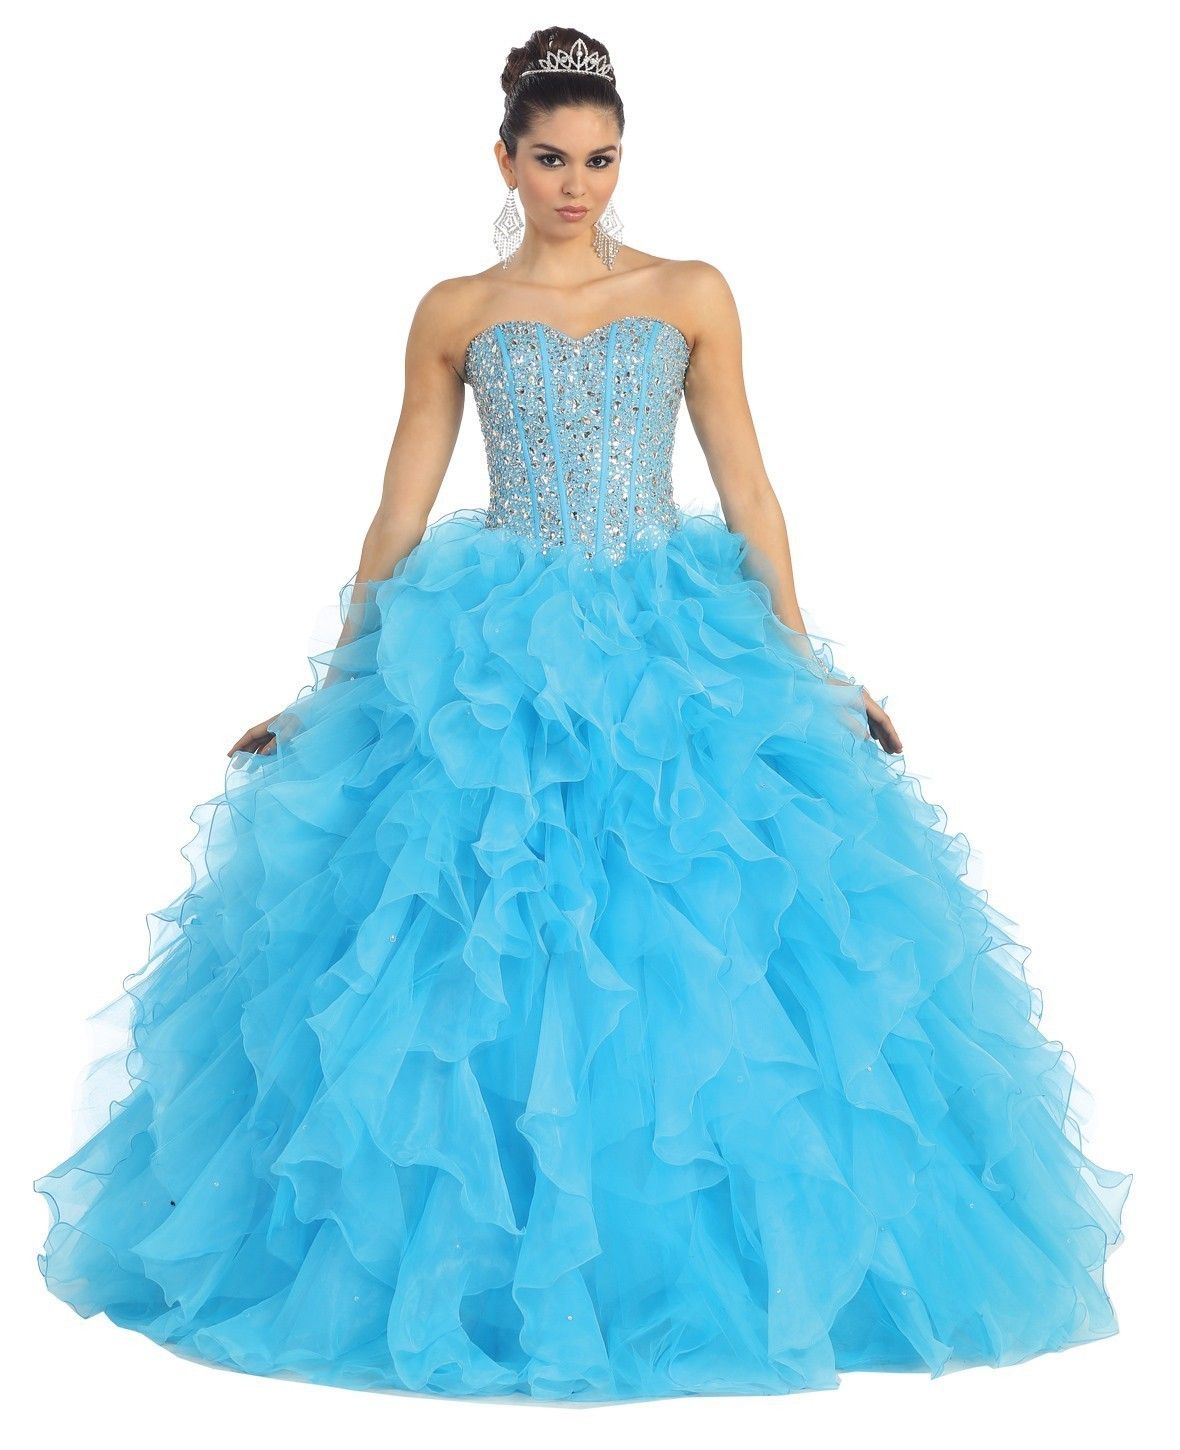 Ball Gown Prom Dresses | Dressed Up Girl